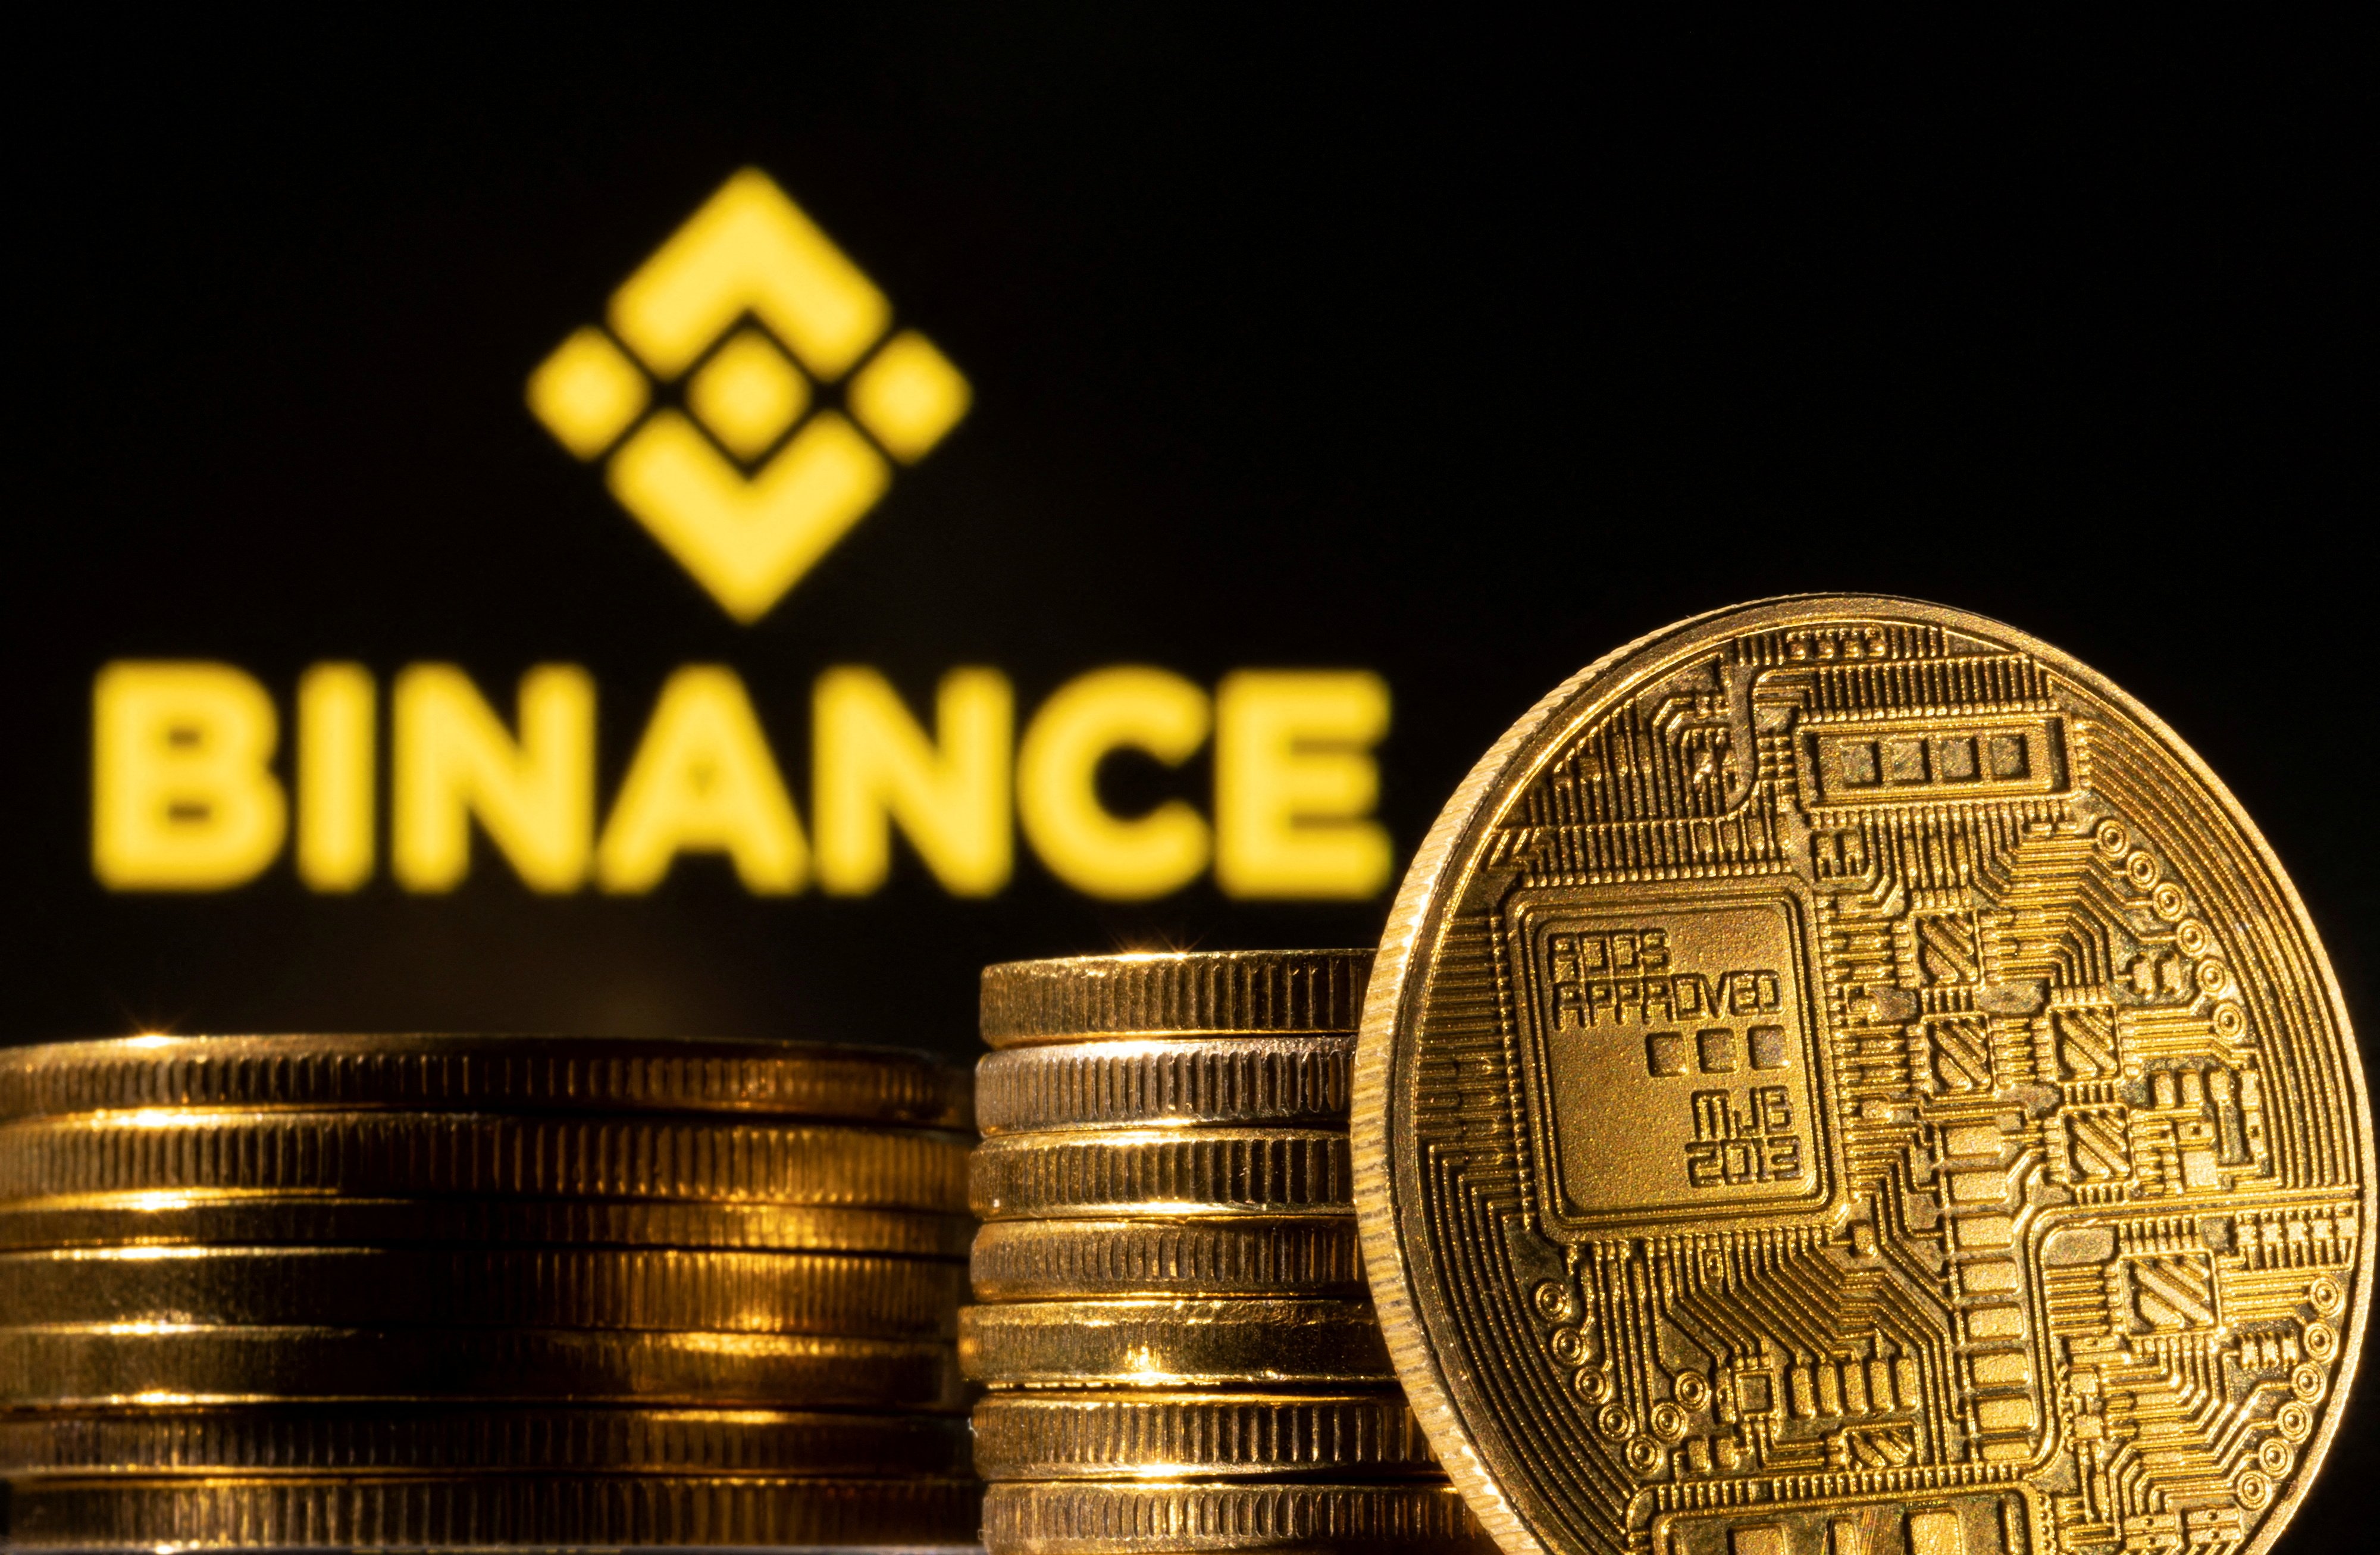 Binance, the world’s largest cryptocurrency exchange, claims a 24-hour trading volume of around US$76 billion. Photo: Reuters